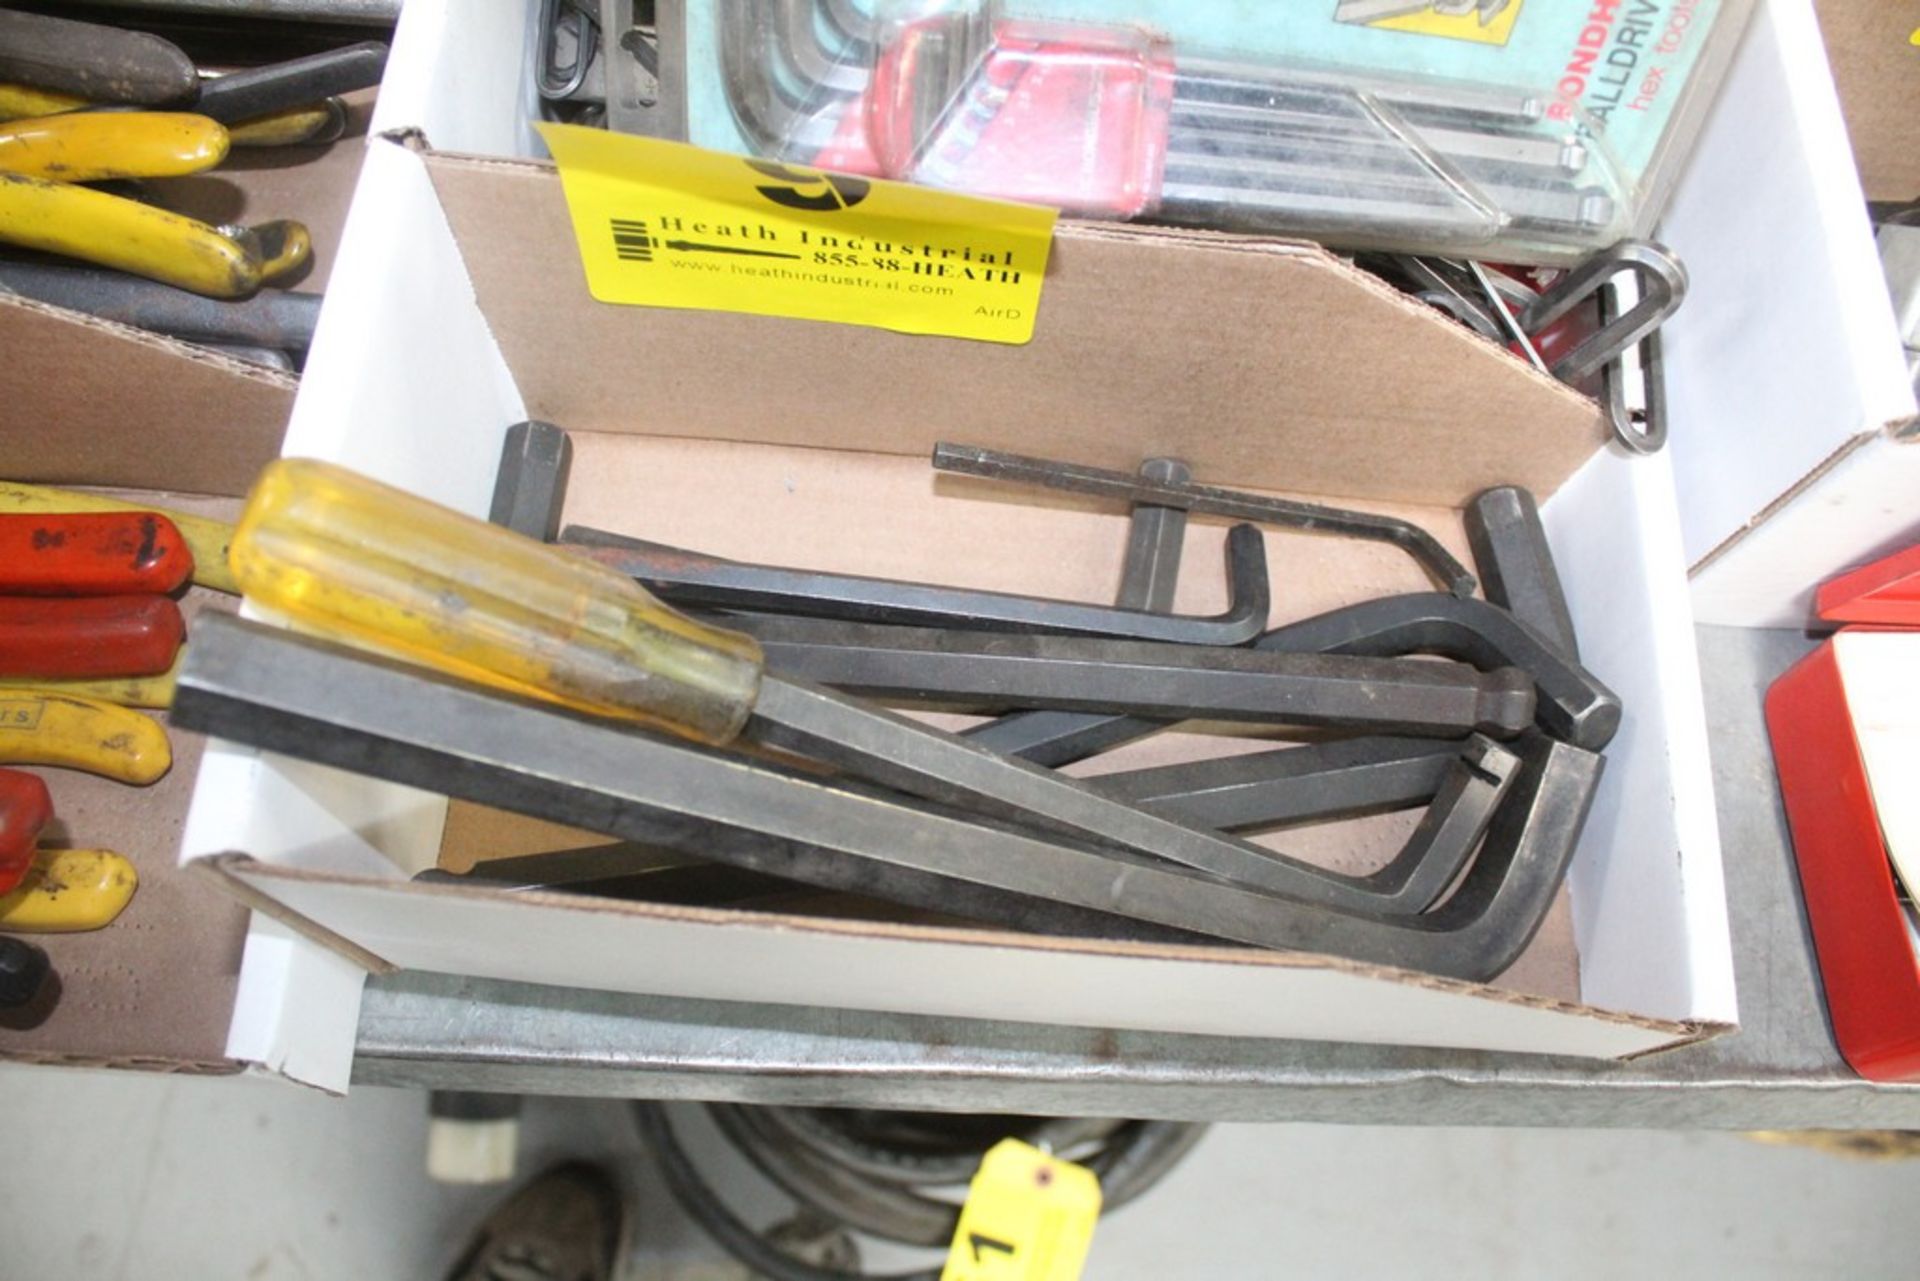 LARGE QUANTITY OF LARGE ALLEN WRENCHES